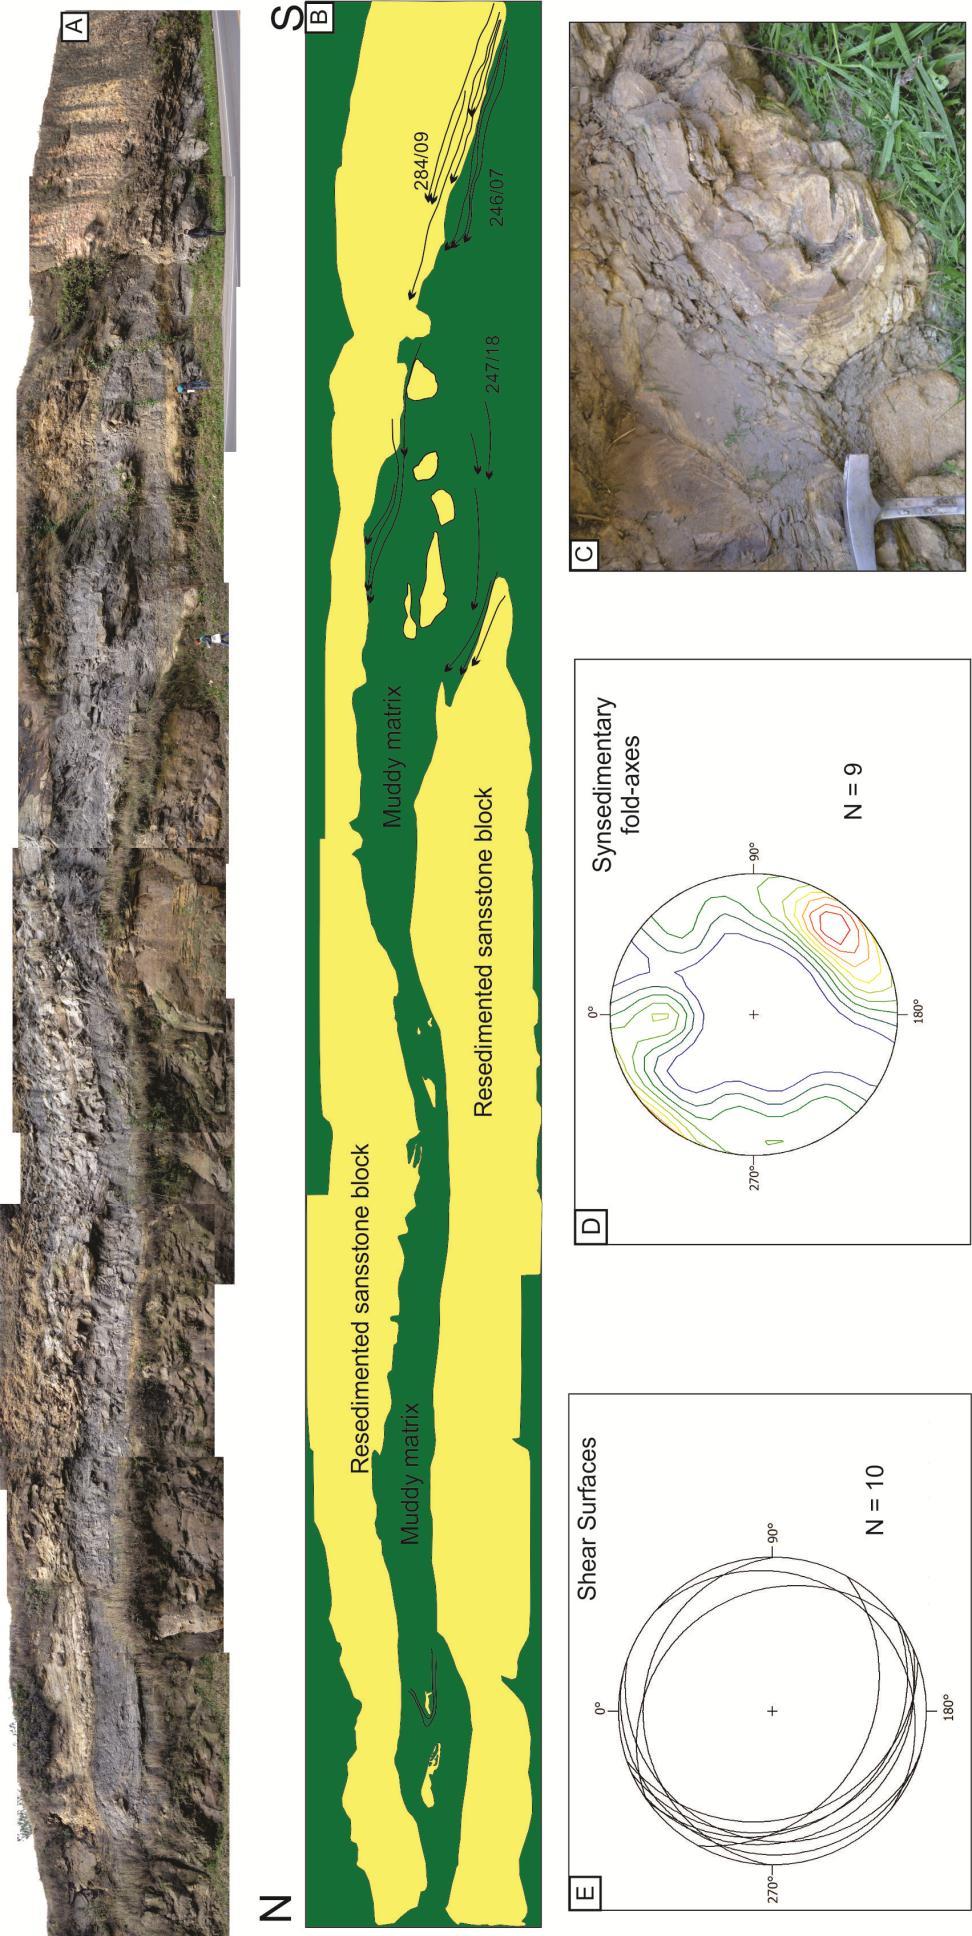 Figure 11- A and B) Mass transport deposit from Mafra Area. Big scale sandstone blocks within muddy MTD.